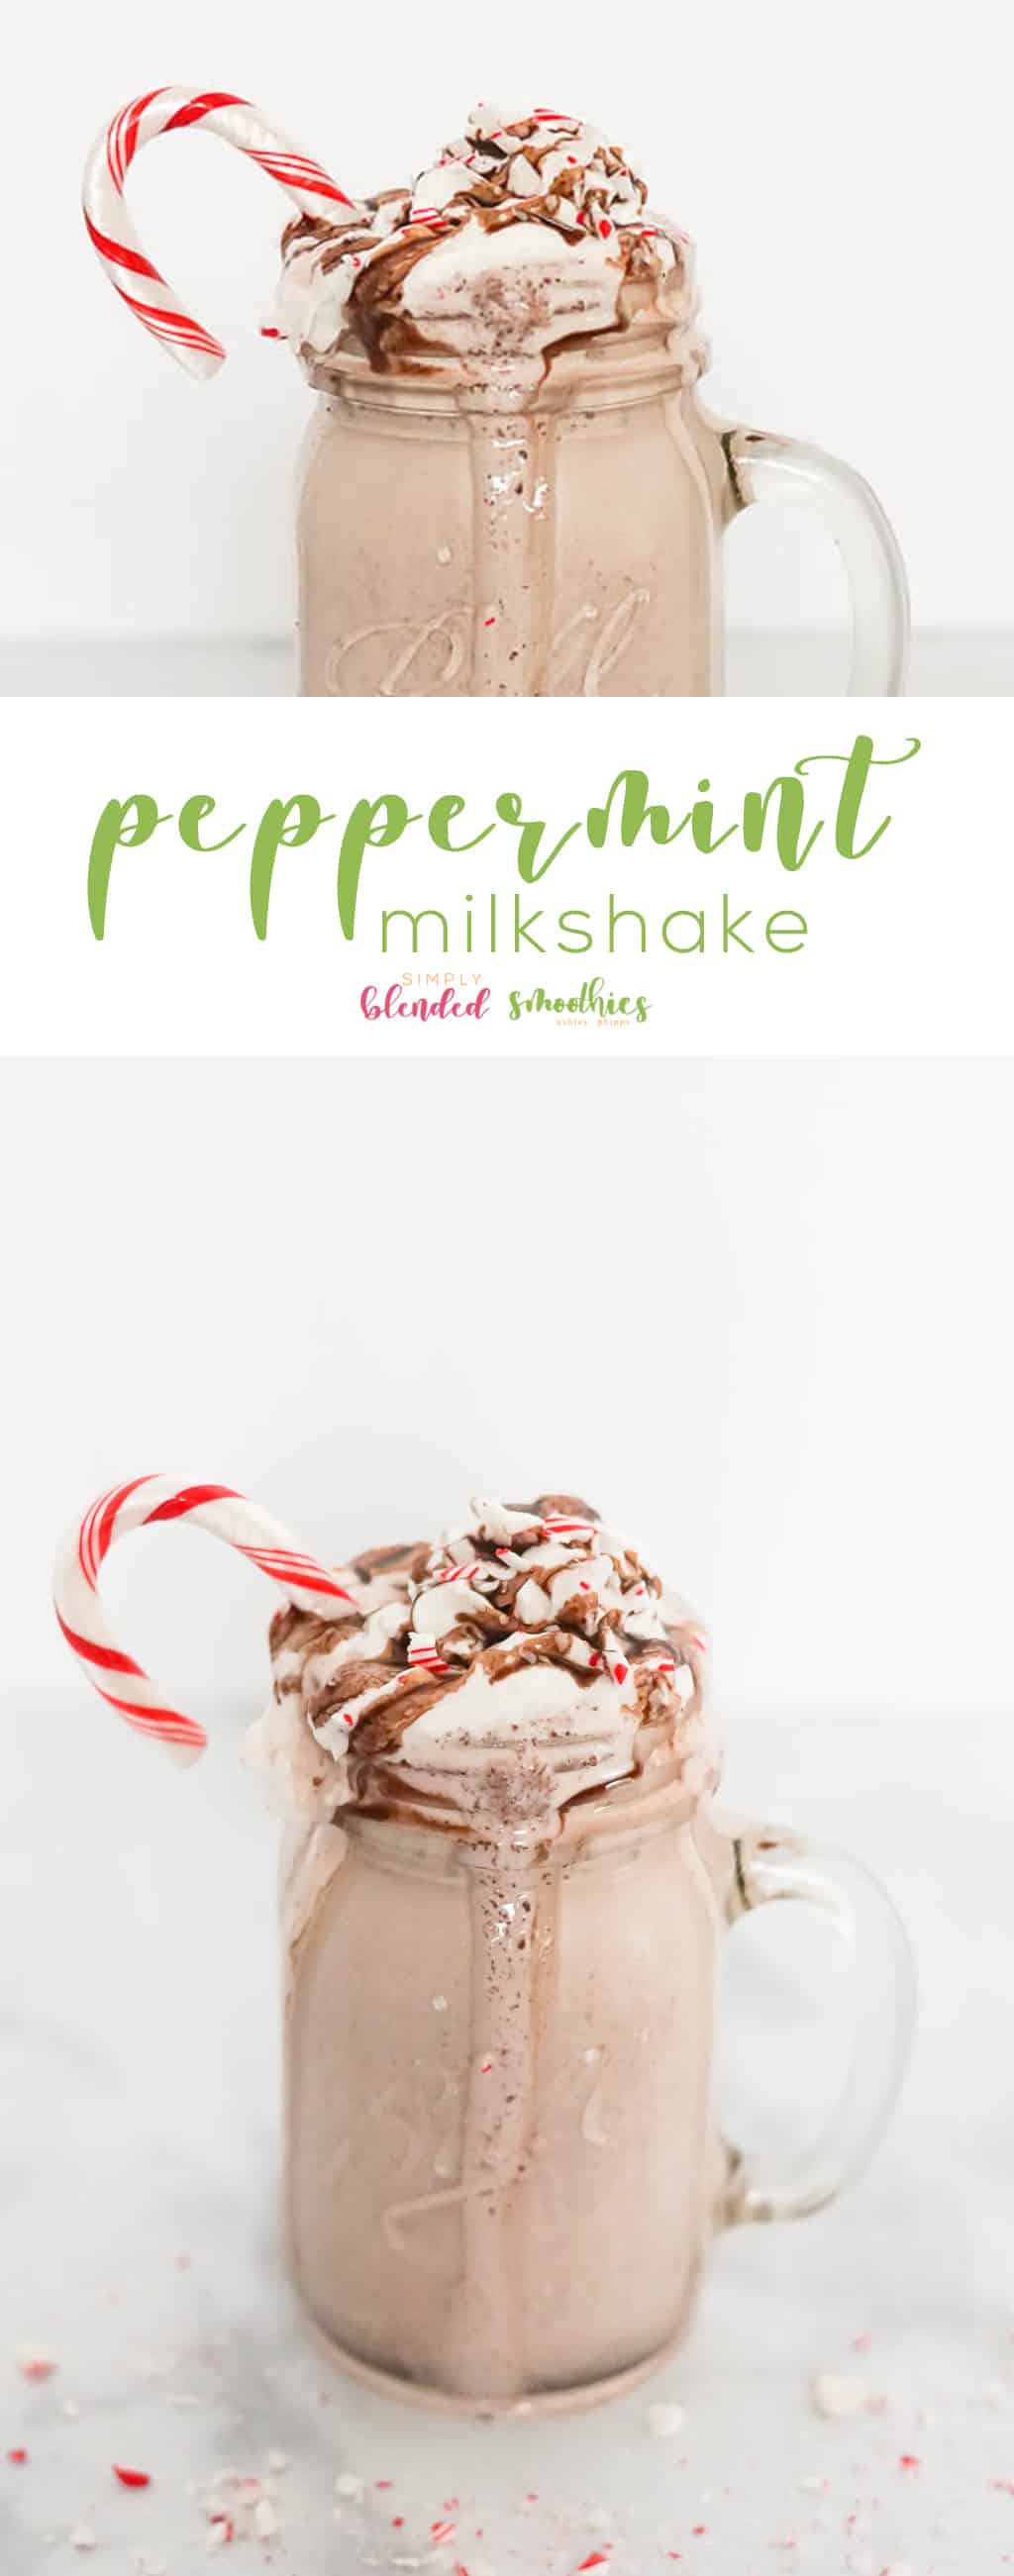 Peppermint Shake Recipe - A Delicious Knock-Off That Is Better Then You Can Buy Out - A Delicious Peppermint Milkshake Recipe